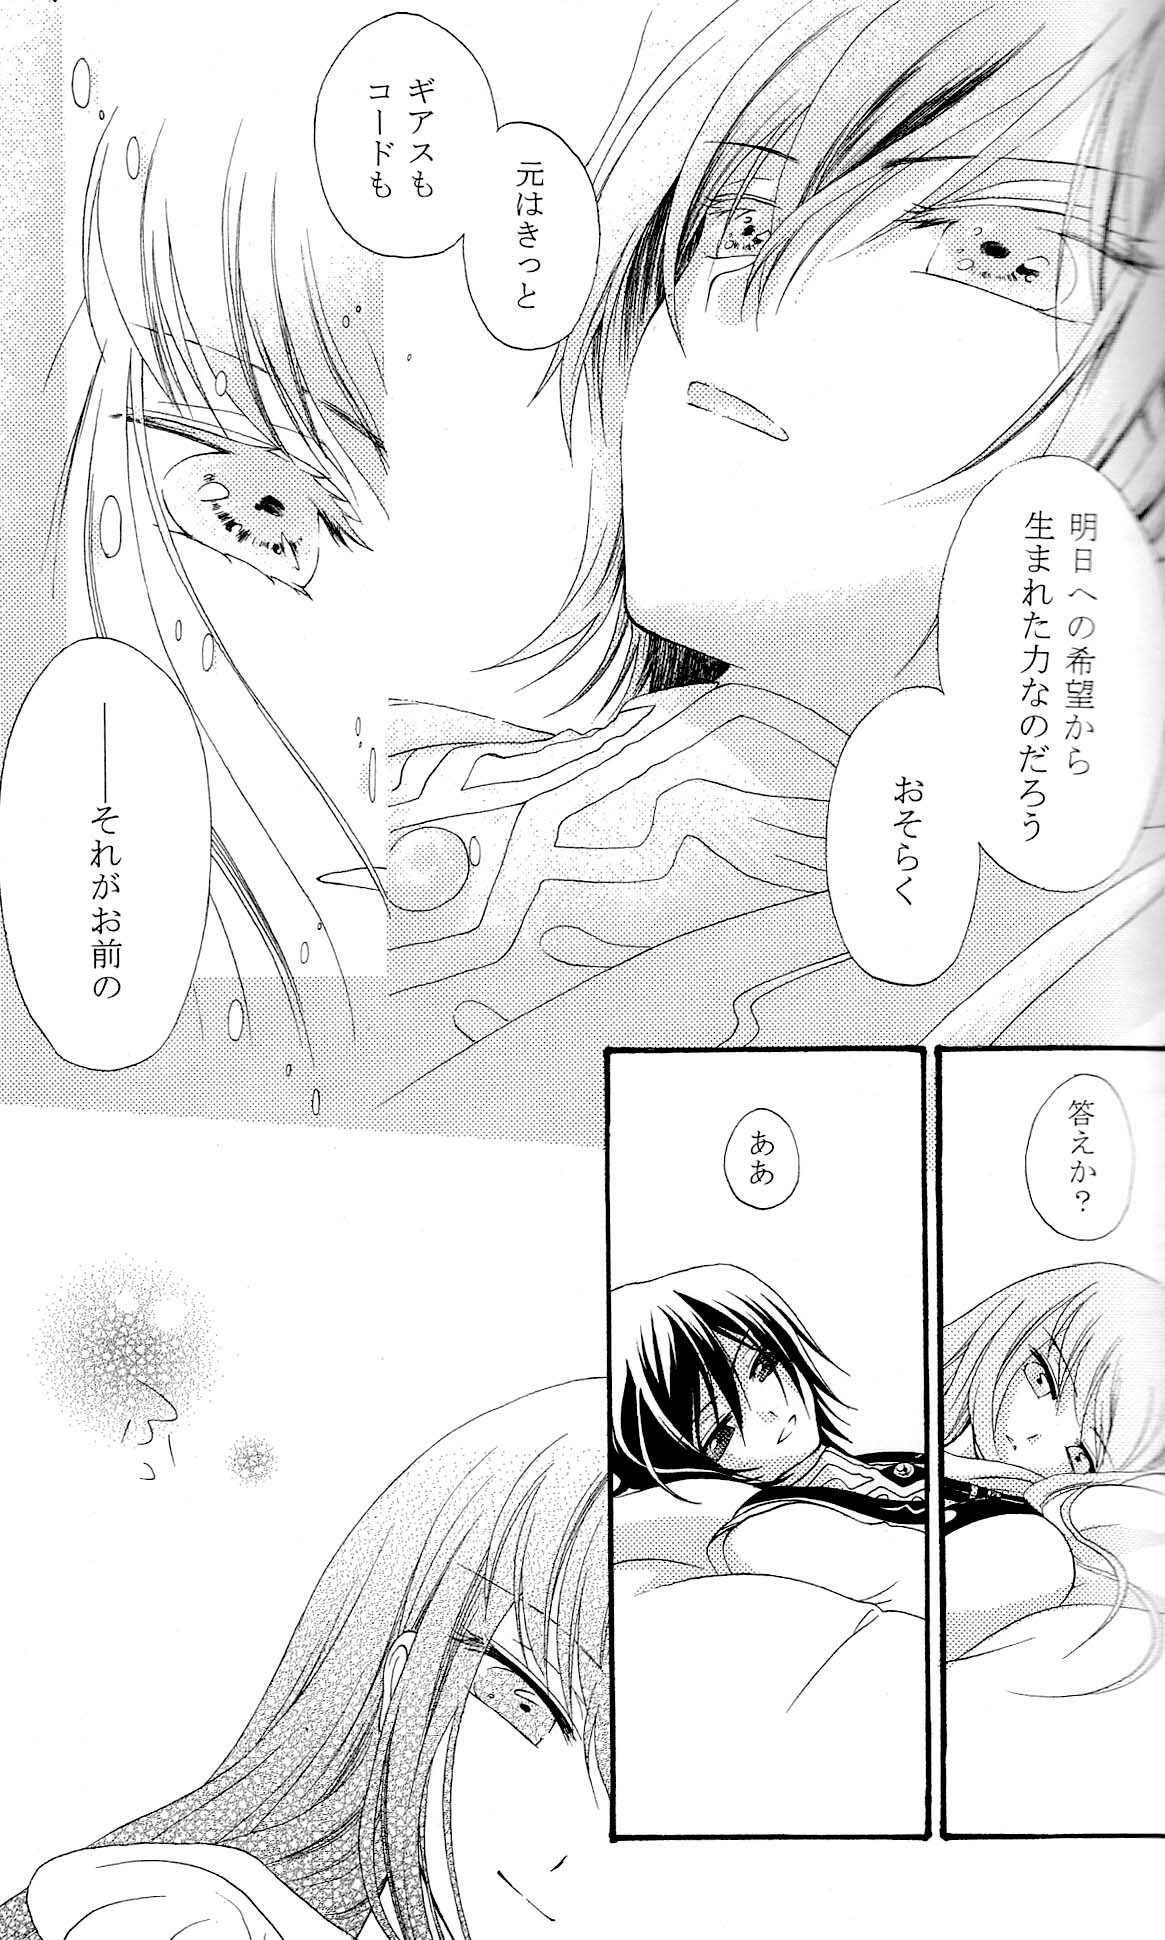 [APRICOT TEA] The last love letter presented to my dear only partner. (Code Geass) page 6 full